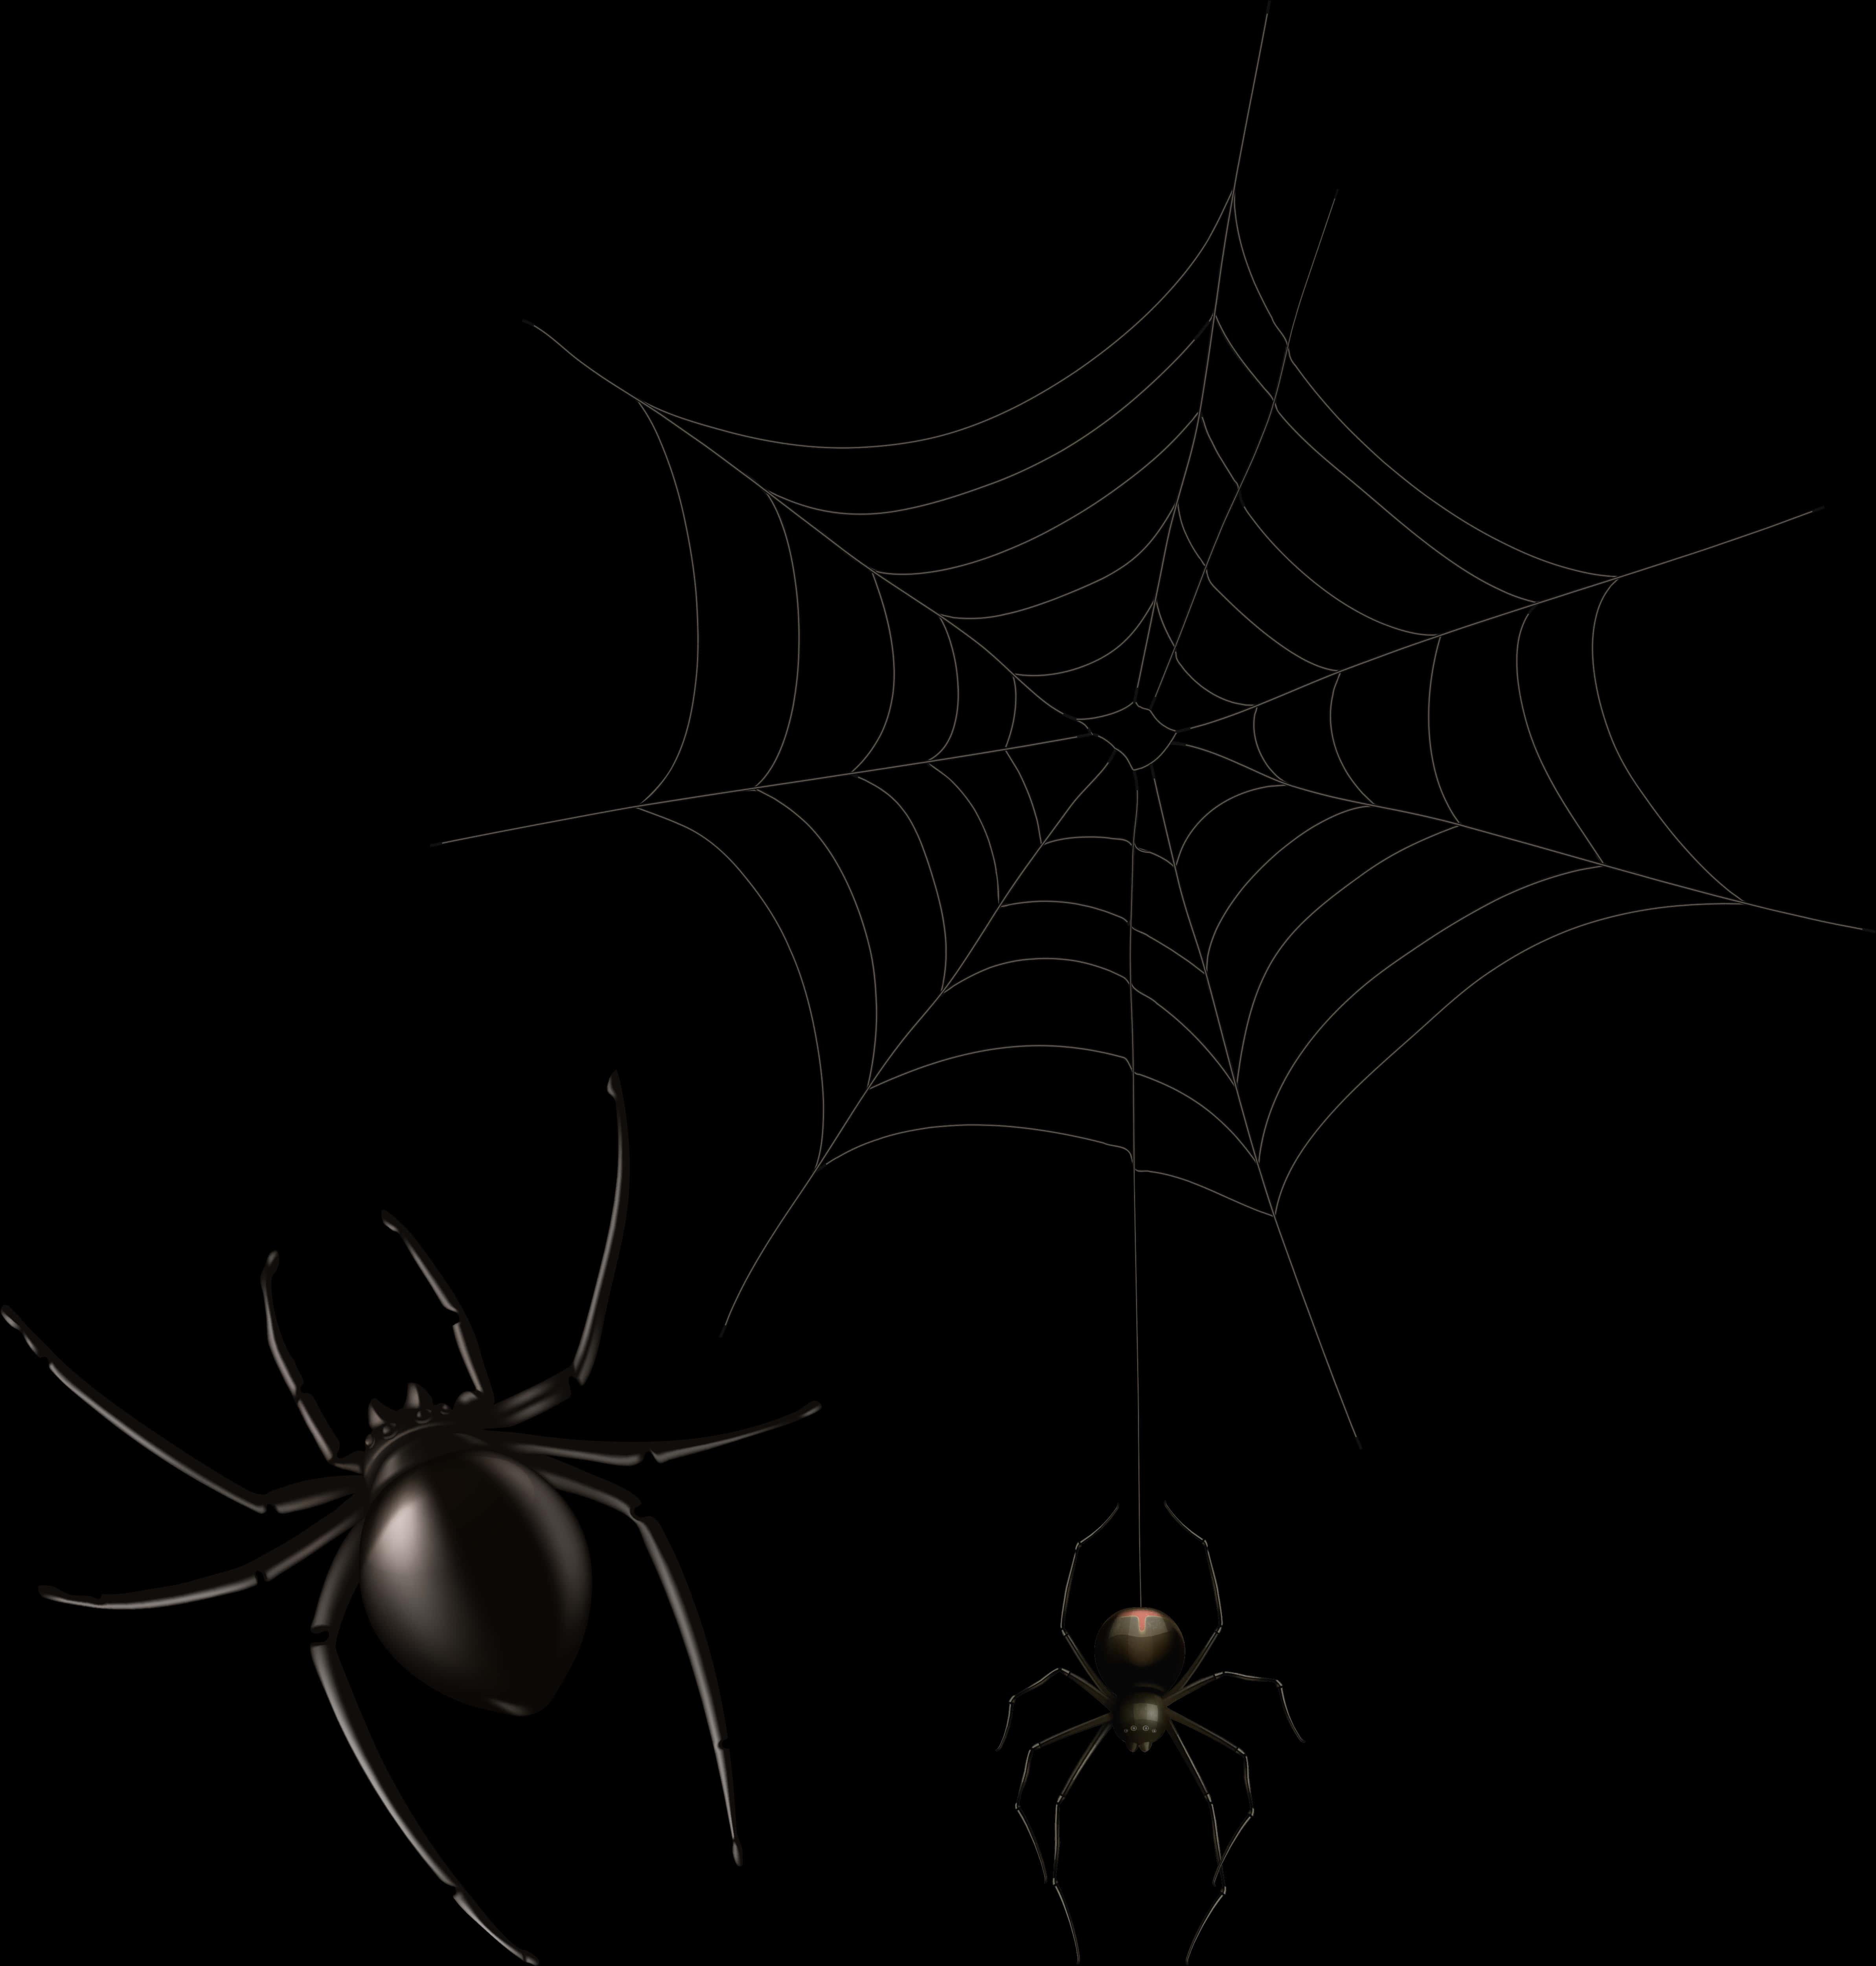 A Spider And A Web